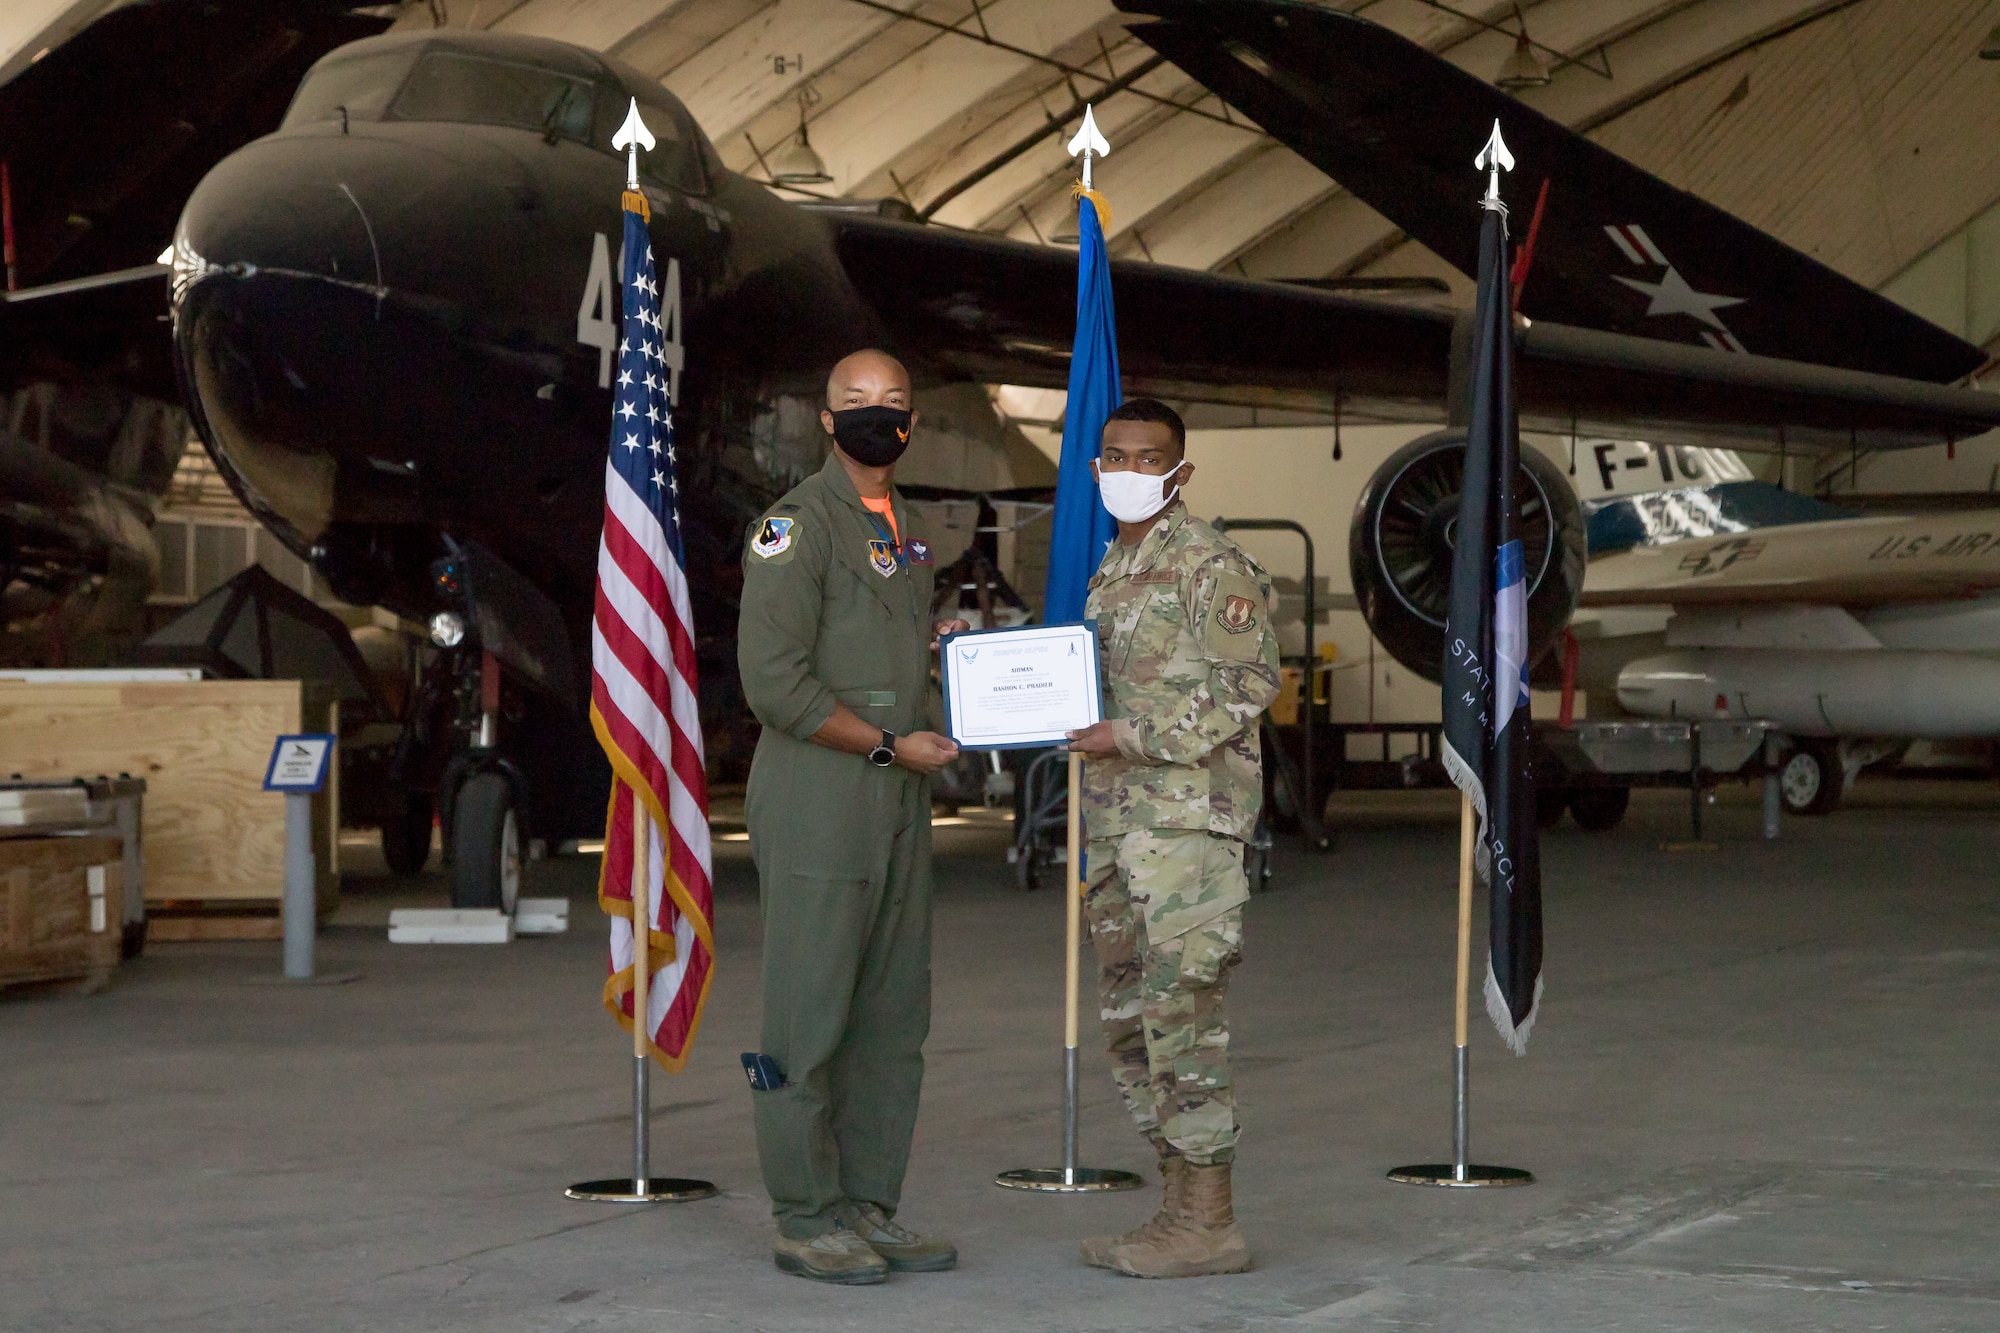 Airman Rashon Pradier, 412th Communications Squadron, originally of Lewisville, Texas, accepts his U.S. Space Force certificate from Col. Randel Gordon, 412th Test Wing Vice Commander, during a Space Force Transfer Ceremony at Edwards Air Force Base, California, Feb. 11. (Air Force photo by Richard Gonzales)